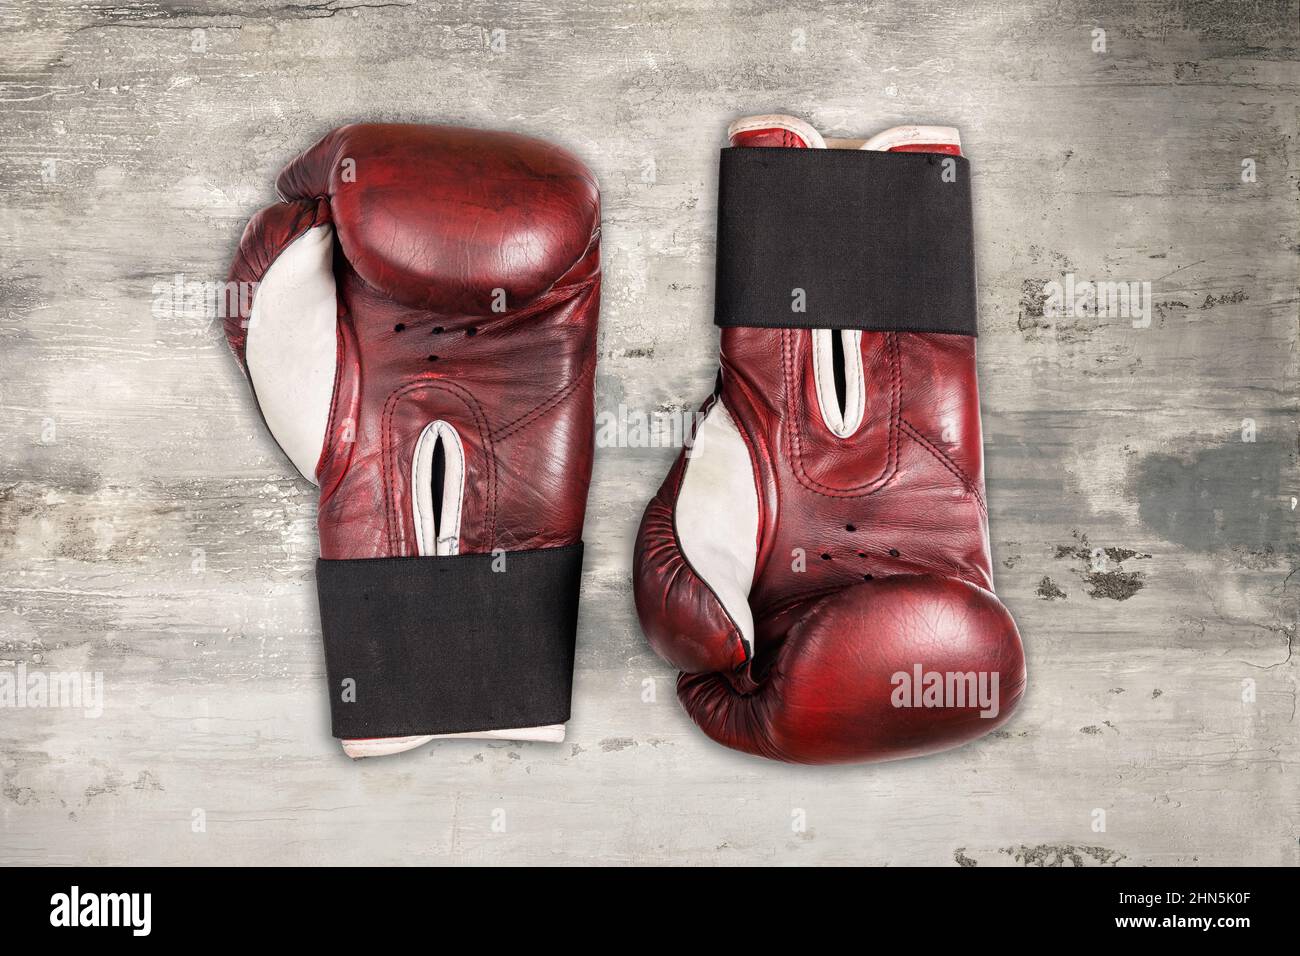 Top view of vintage red leather boxing gloves placed on weathered gray wooden surface Stock Photo